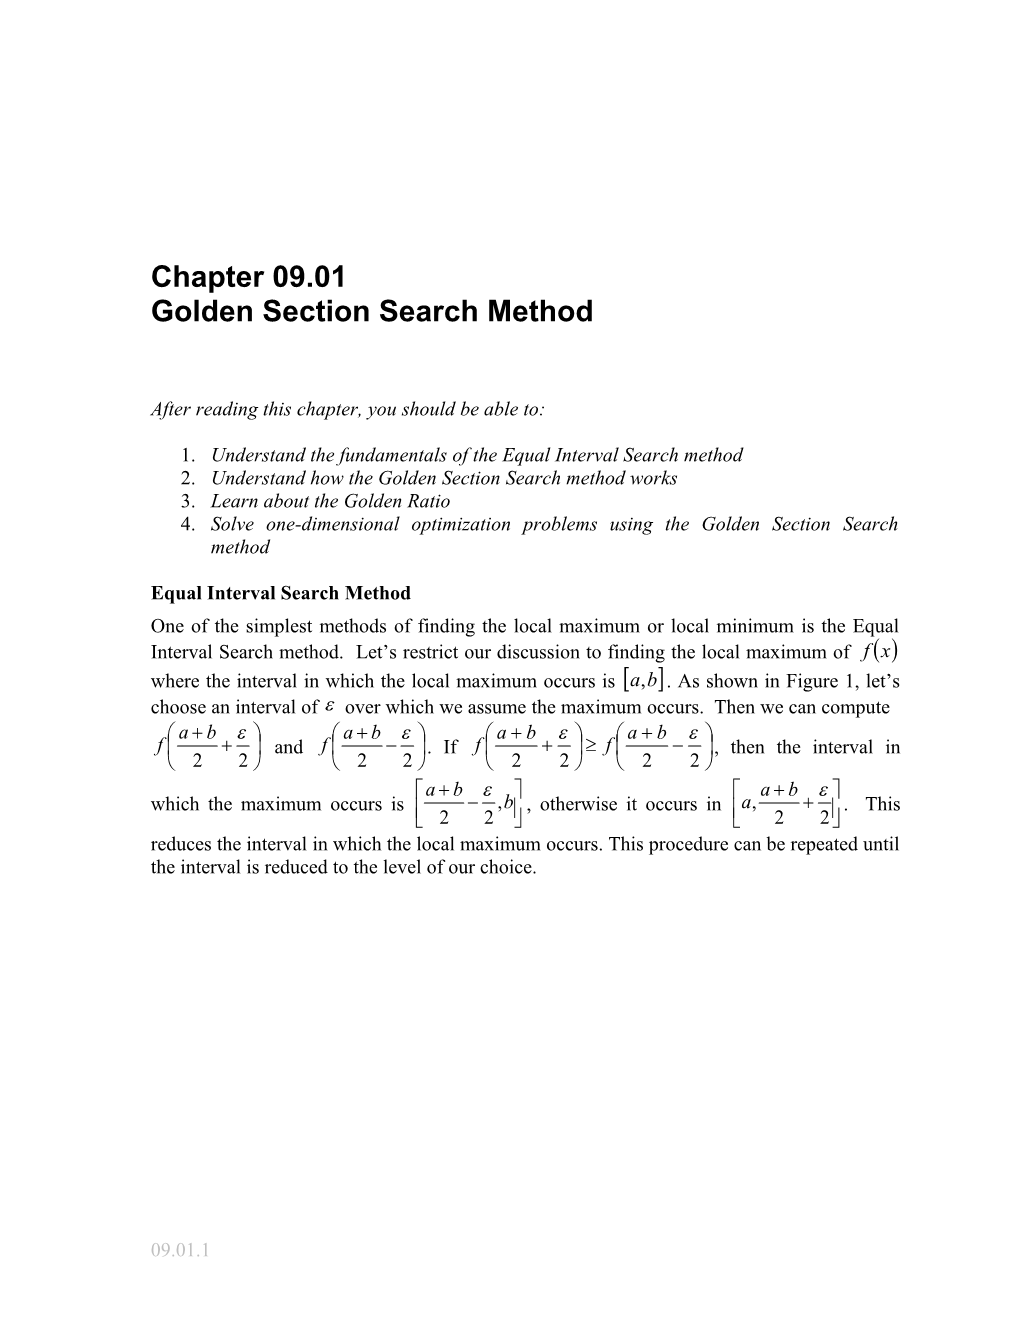 Golden Section Search Method